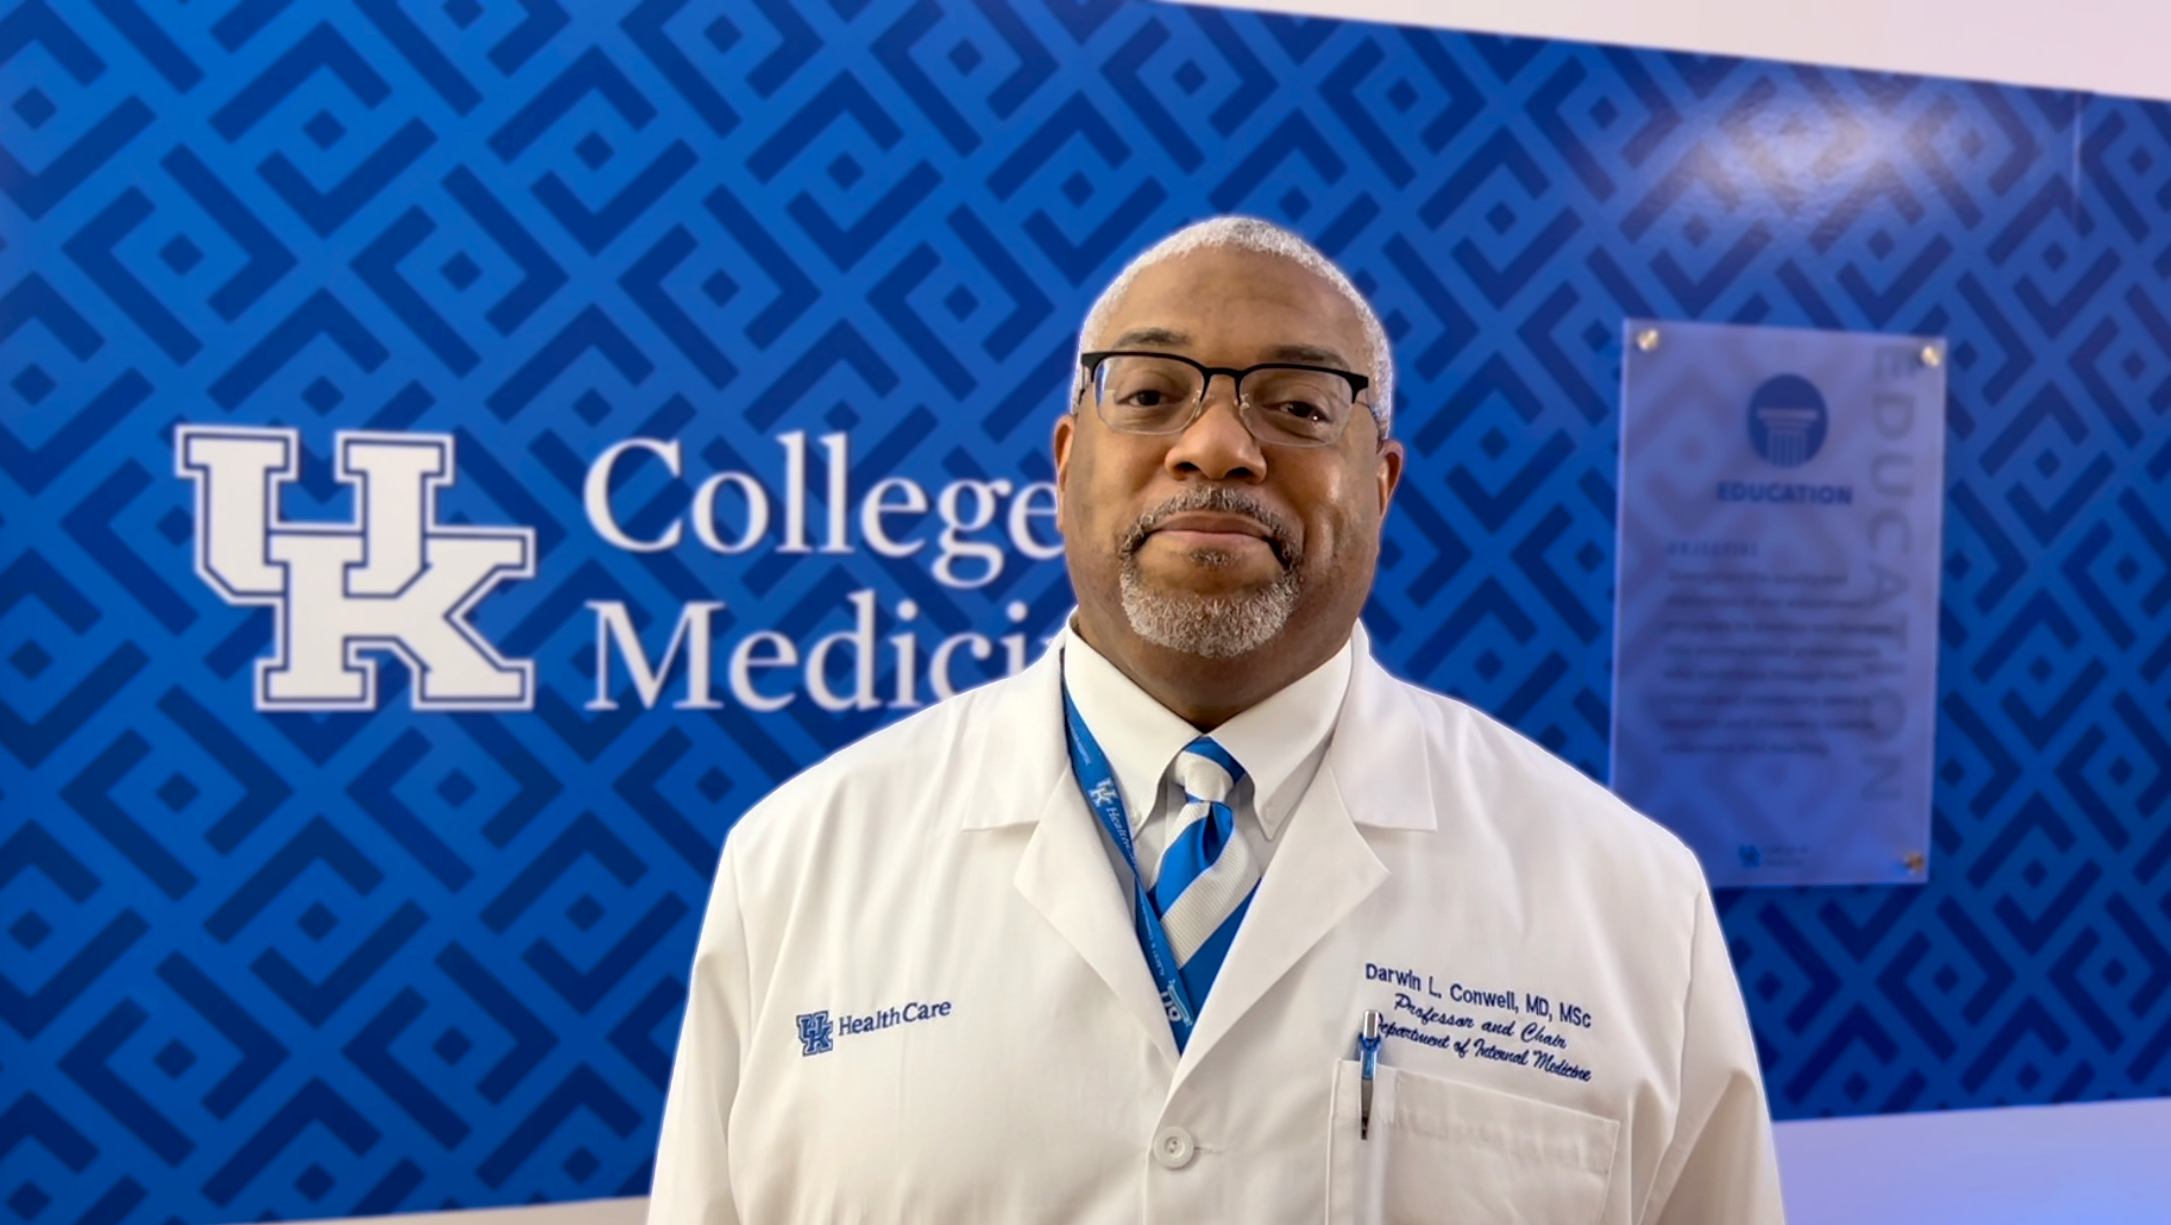 Darwin Conwell, MD in front of a blue UK College of Medicine wall